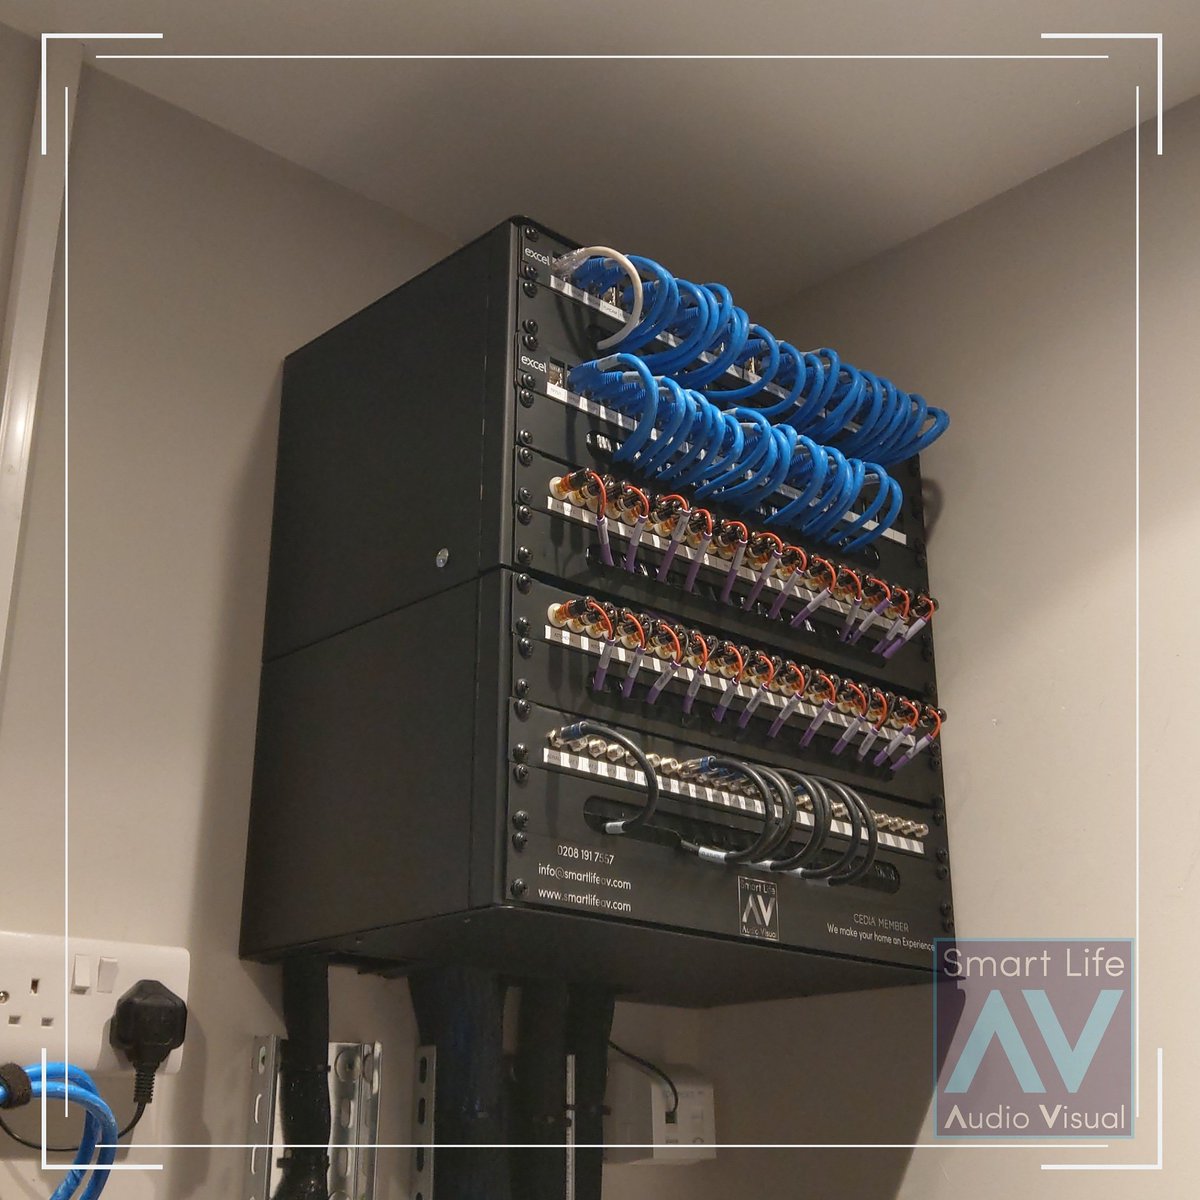 Today we completed our rack rebuild project. Smaller rack & shortened all cables leaving enough for maintainence. The new rack sits perfectly under the termination box in the corner 02081917557 #SmartHome #SmartHomeInstaller #AVRack #AVInstaller #RackBuild #SmartHomeWiring #CEDIA